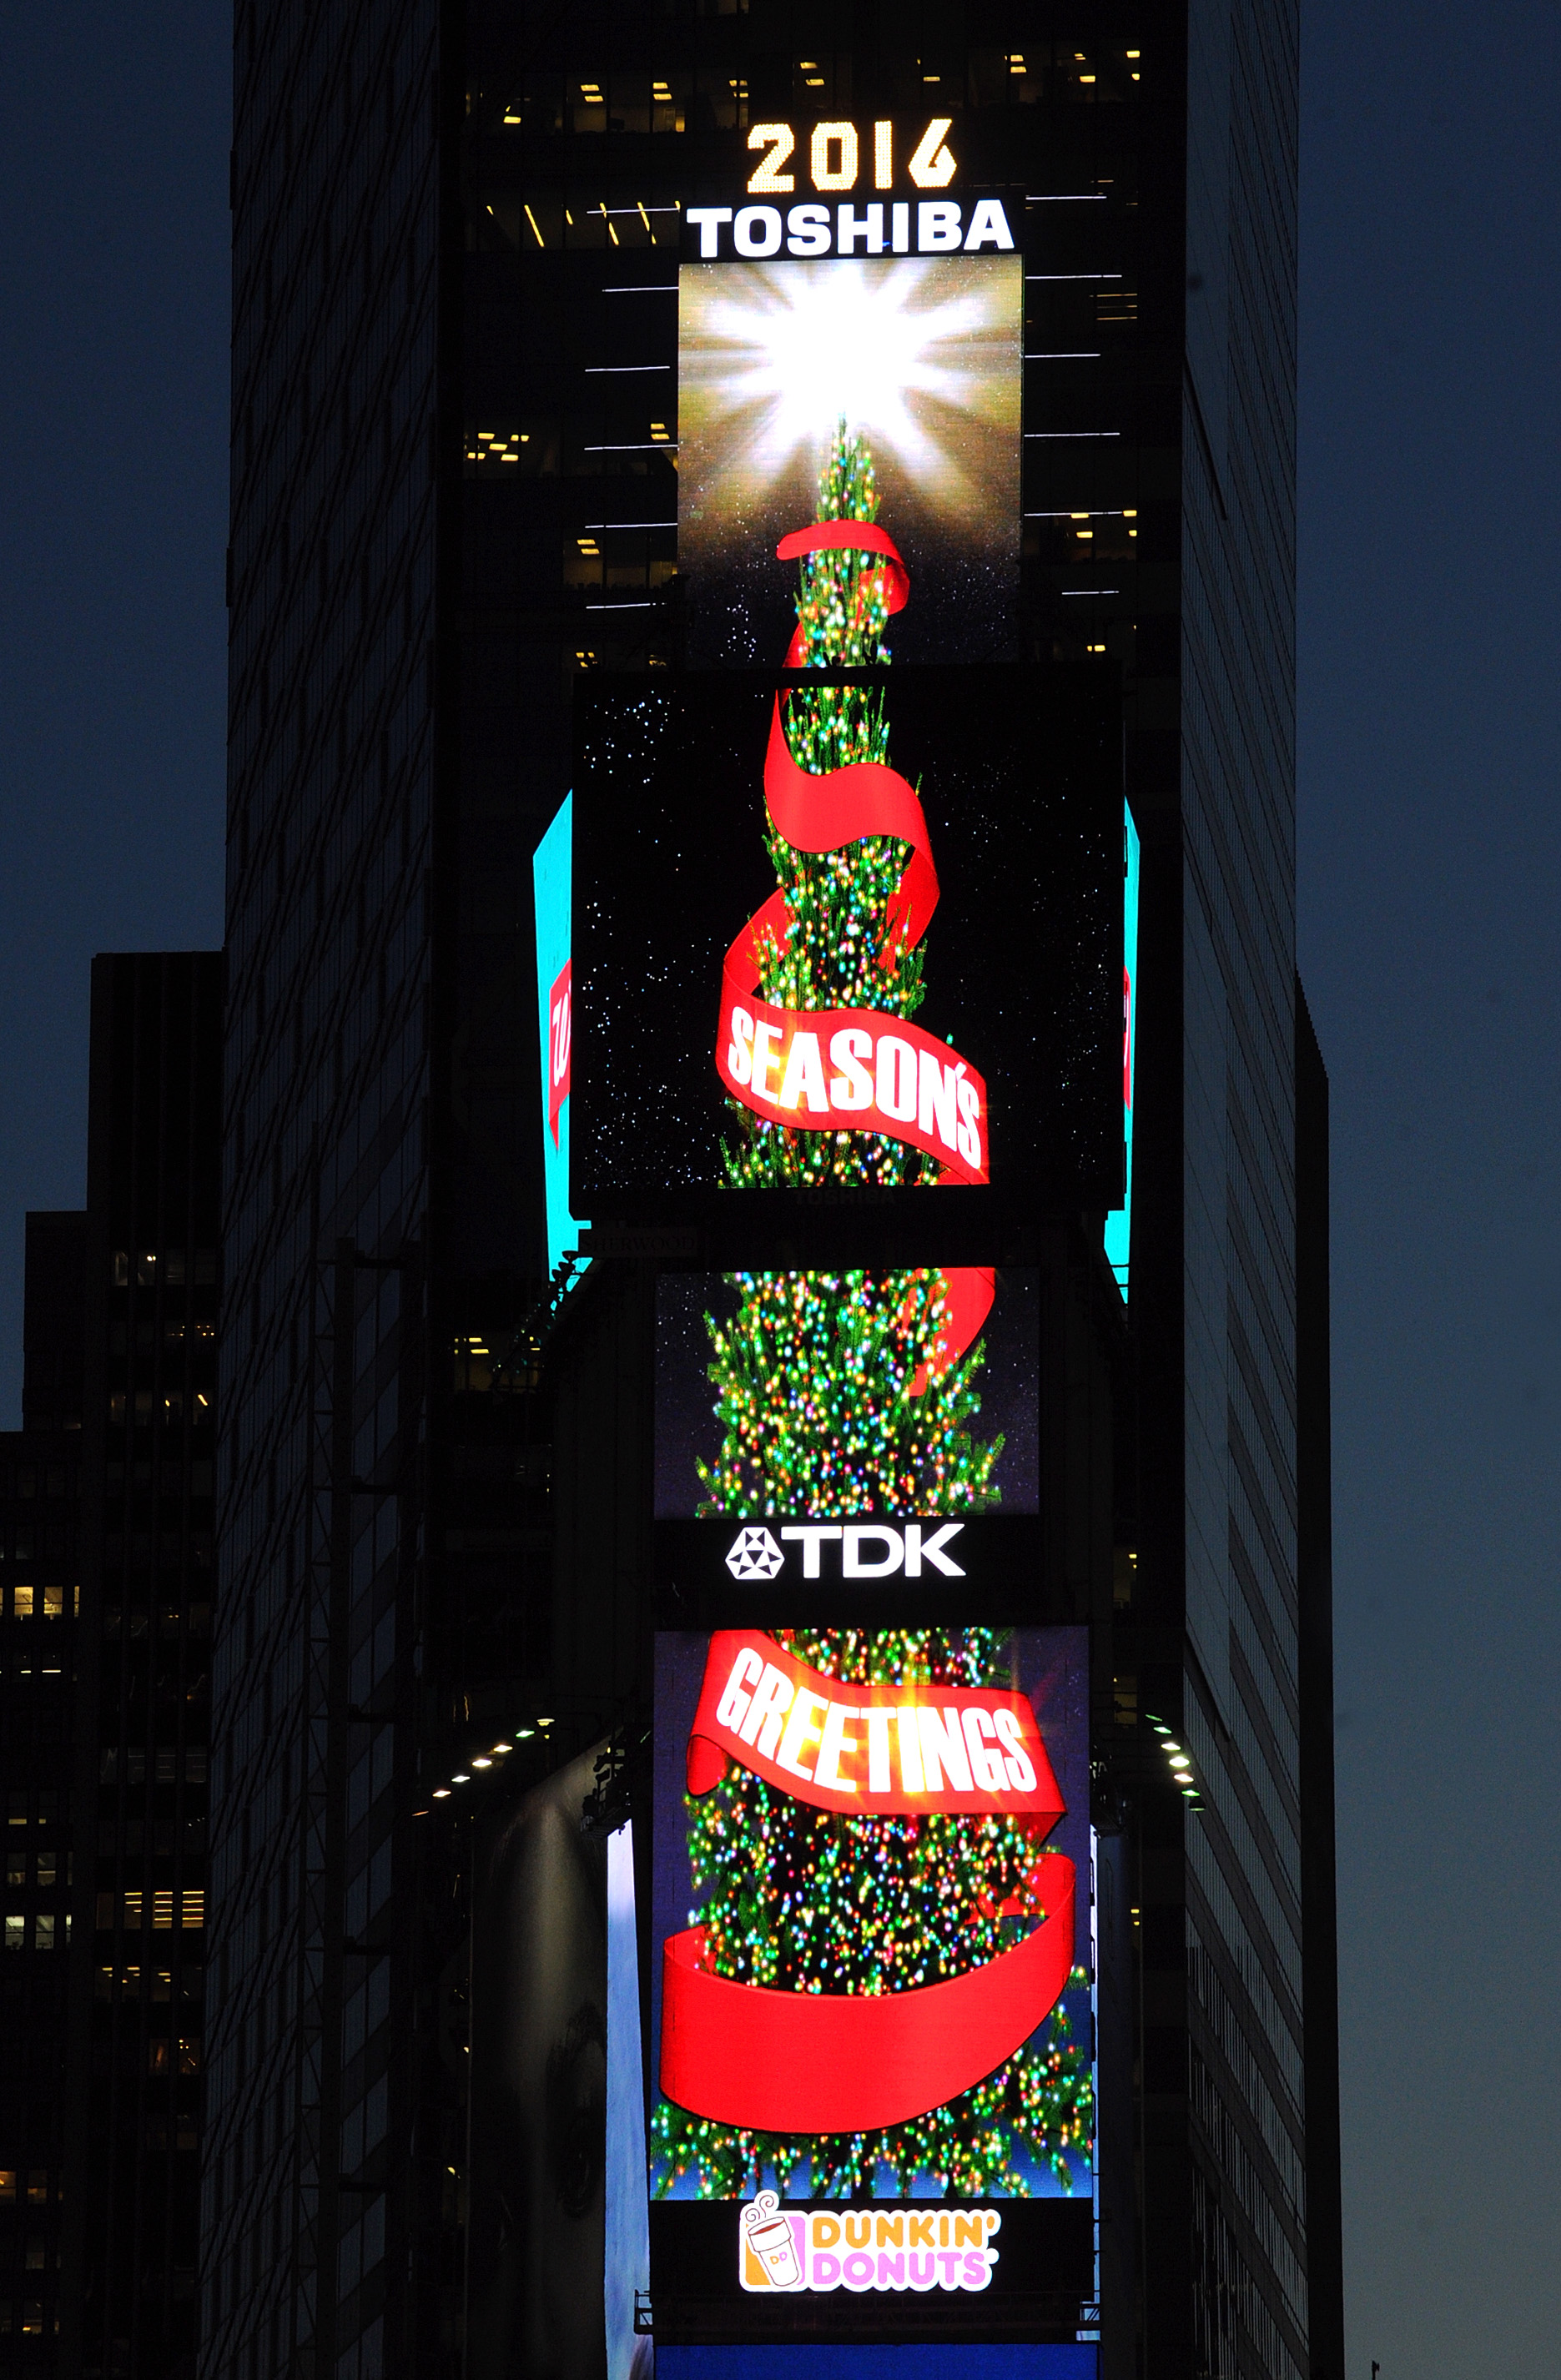 “Season’s Greetings” will Spread Throughout Times Square as the World’s